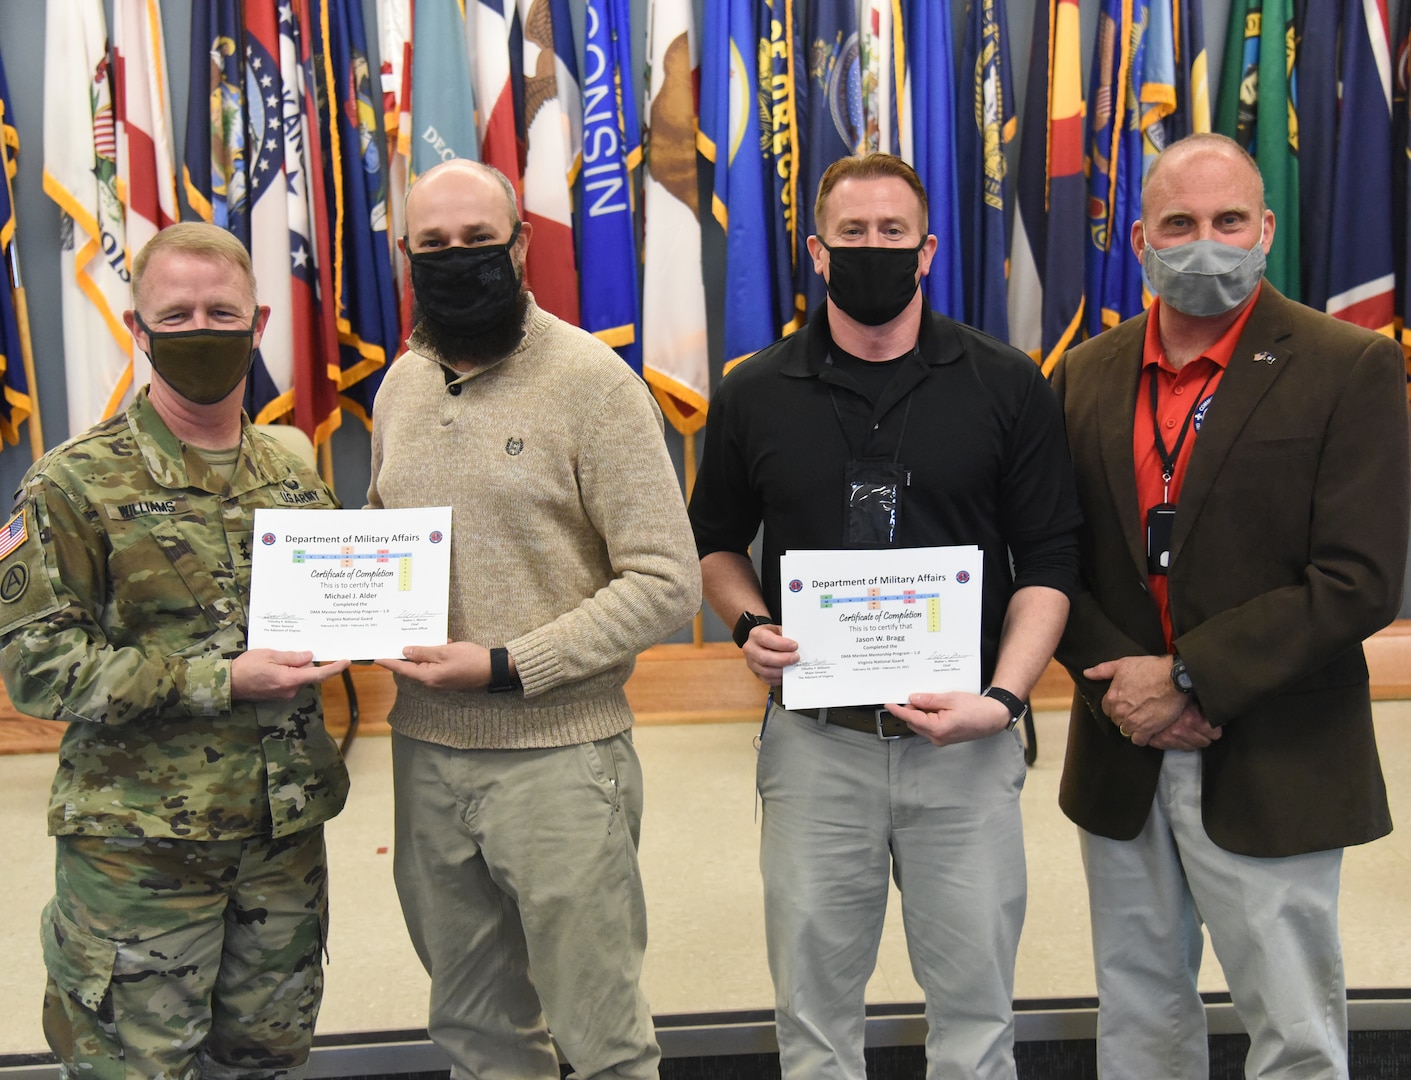 Participants in the Virginia Department of Military Affairs’ first-ever mentorship program graduate during a ceremony Feb. 25, 2021, at Fort Pickett, Virginia.